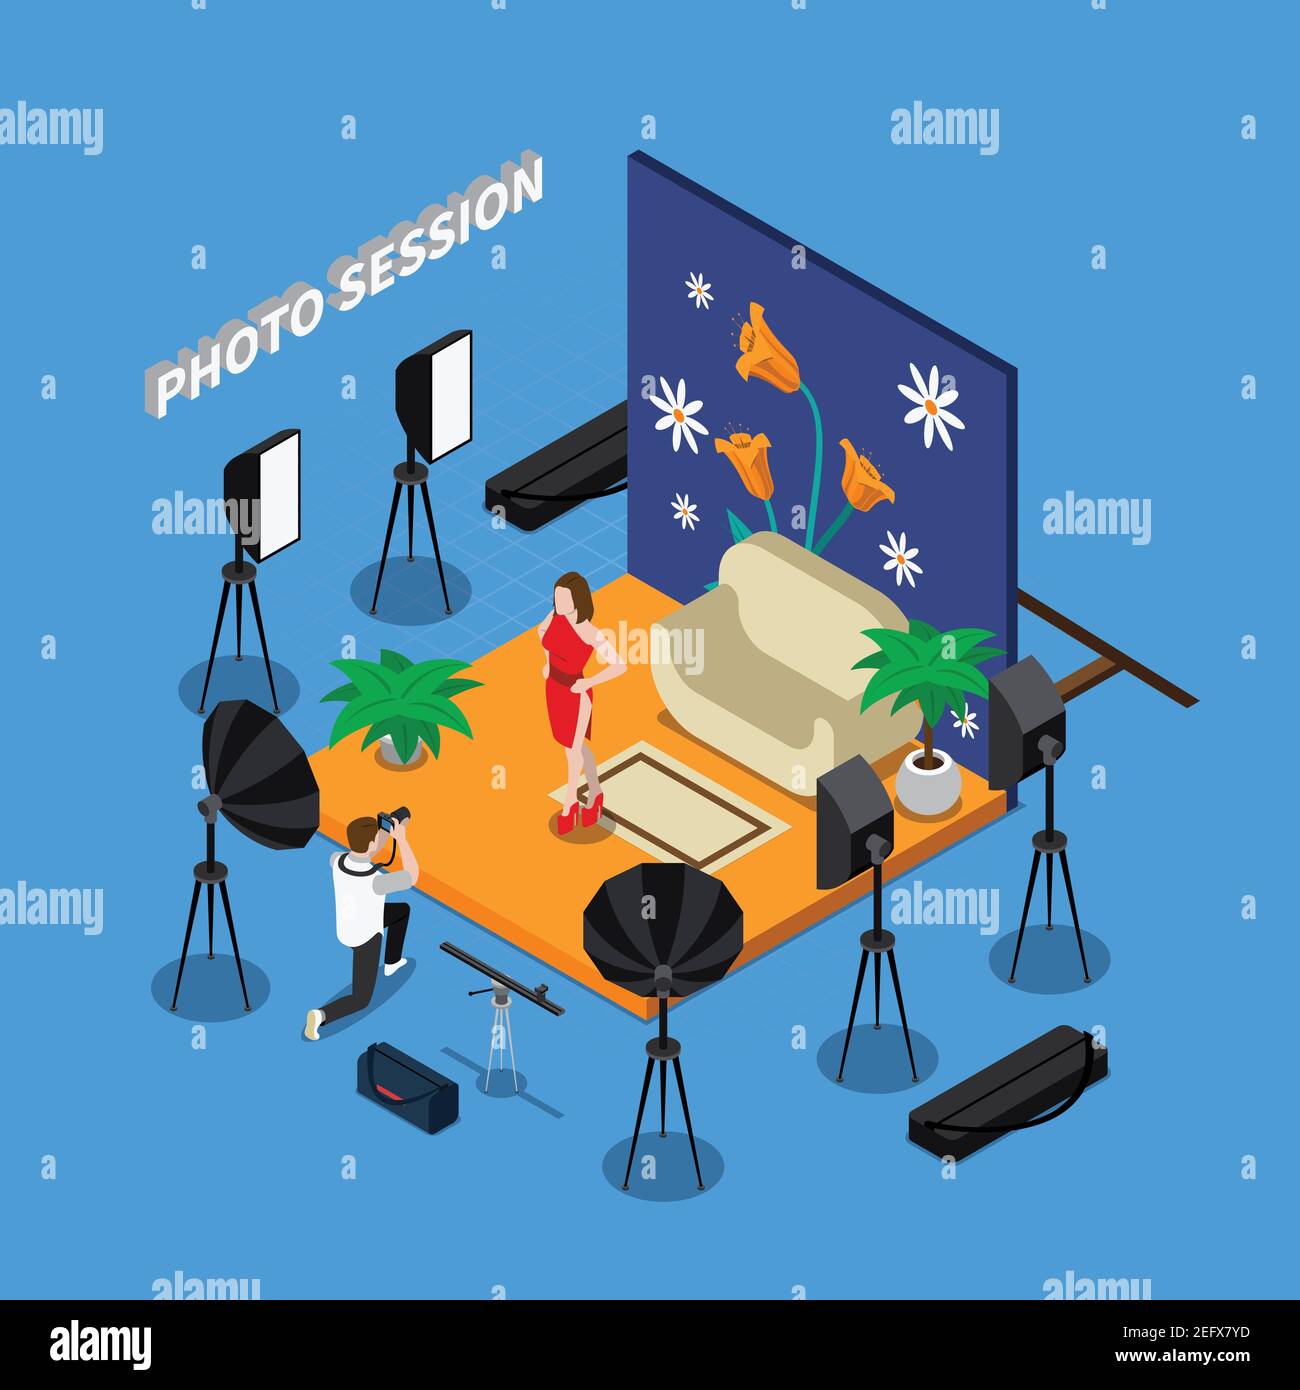 Photo session isometric design including man with camera and girl model in studio with spotlights vector illustration Stock Vector